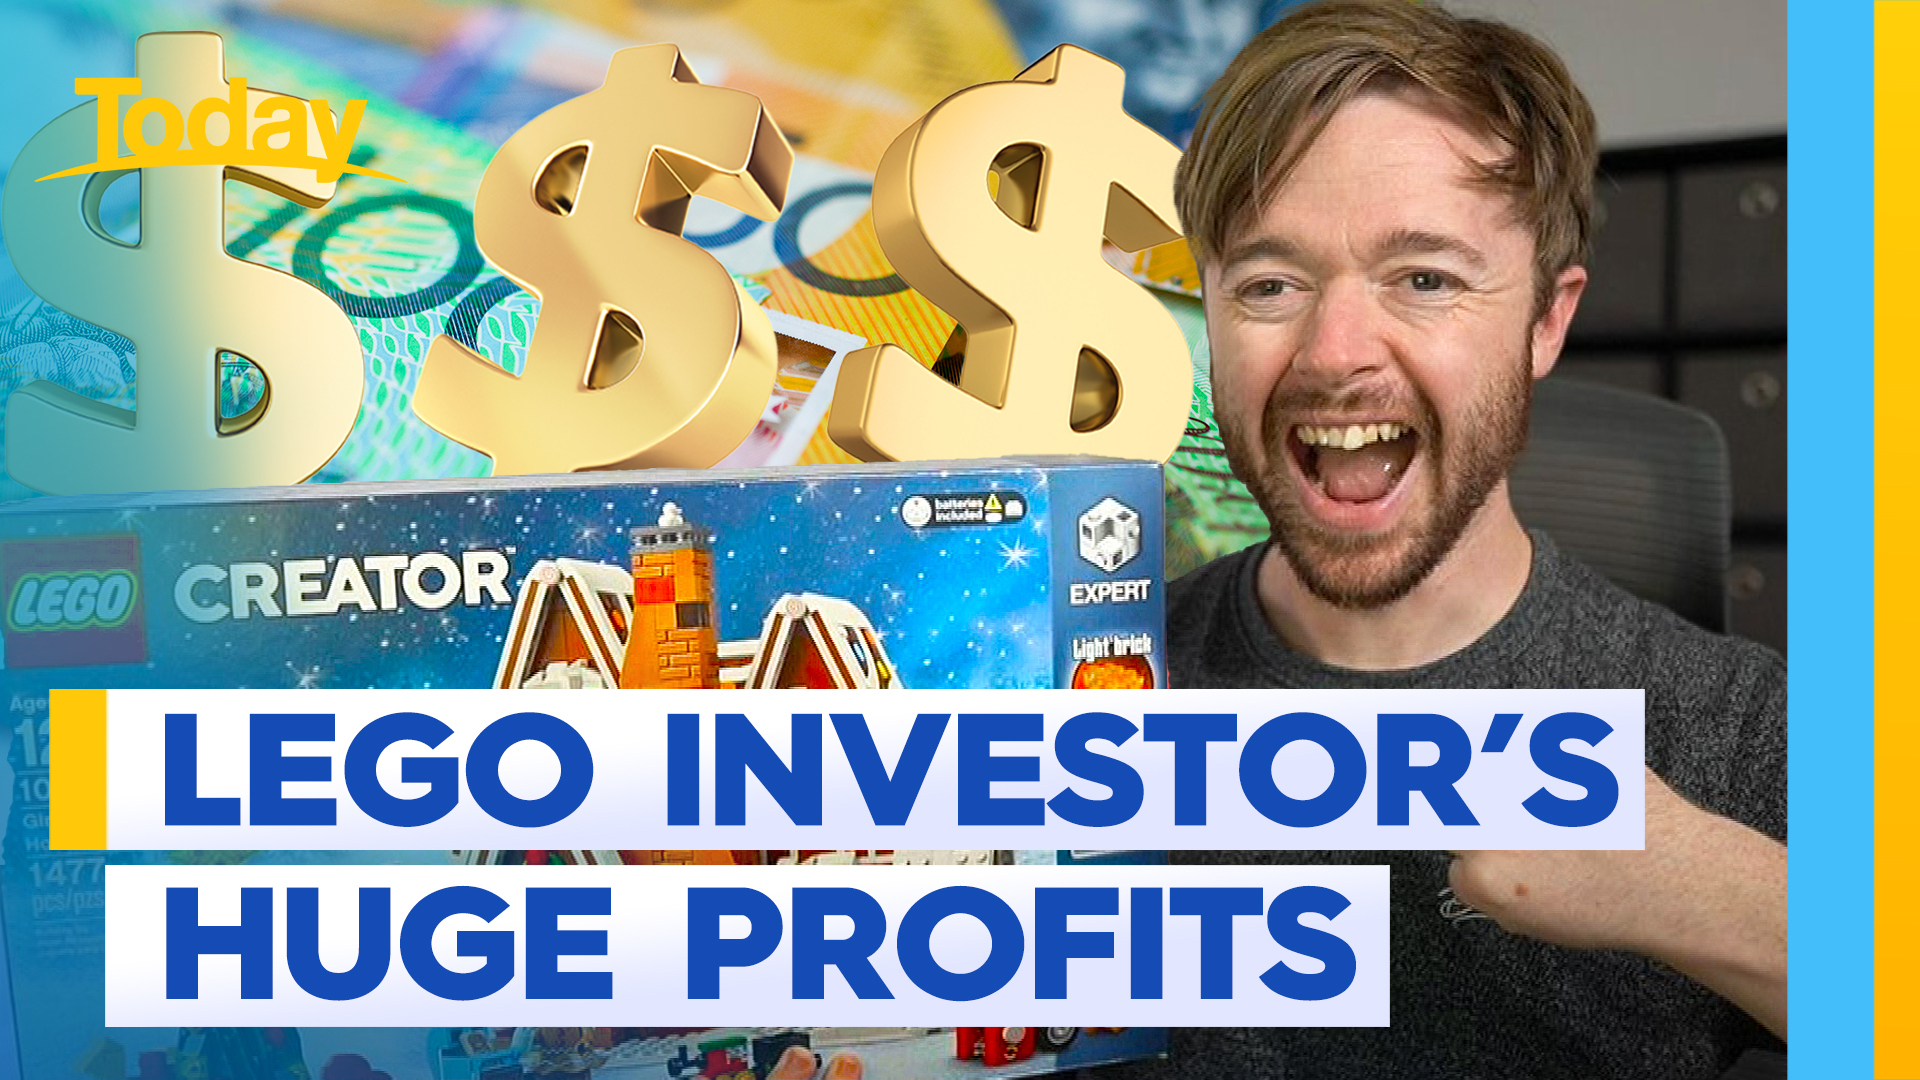 Lego investor makes $500k in two years